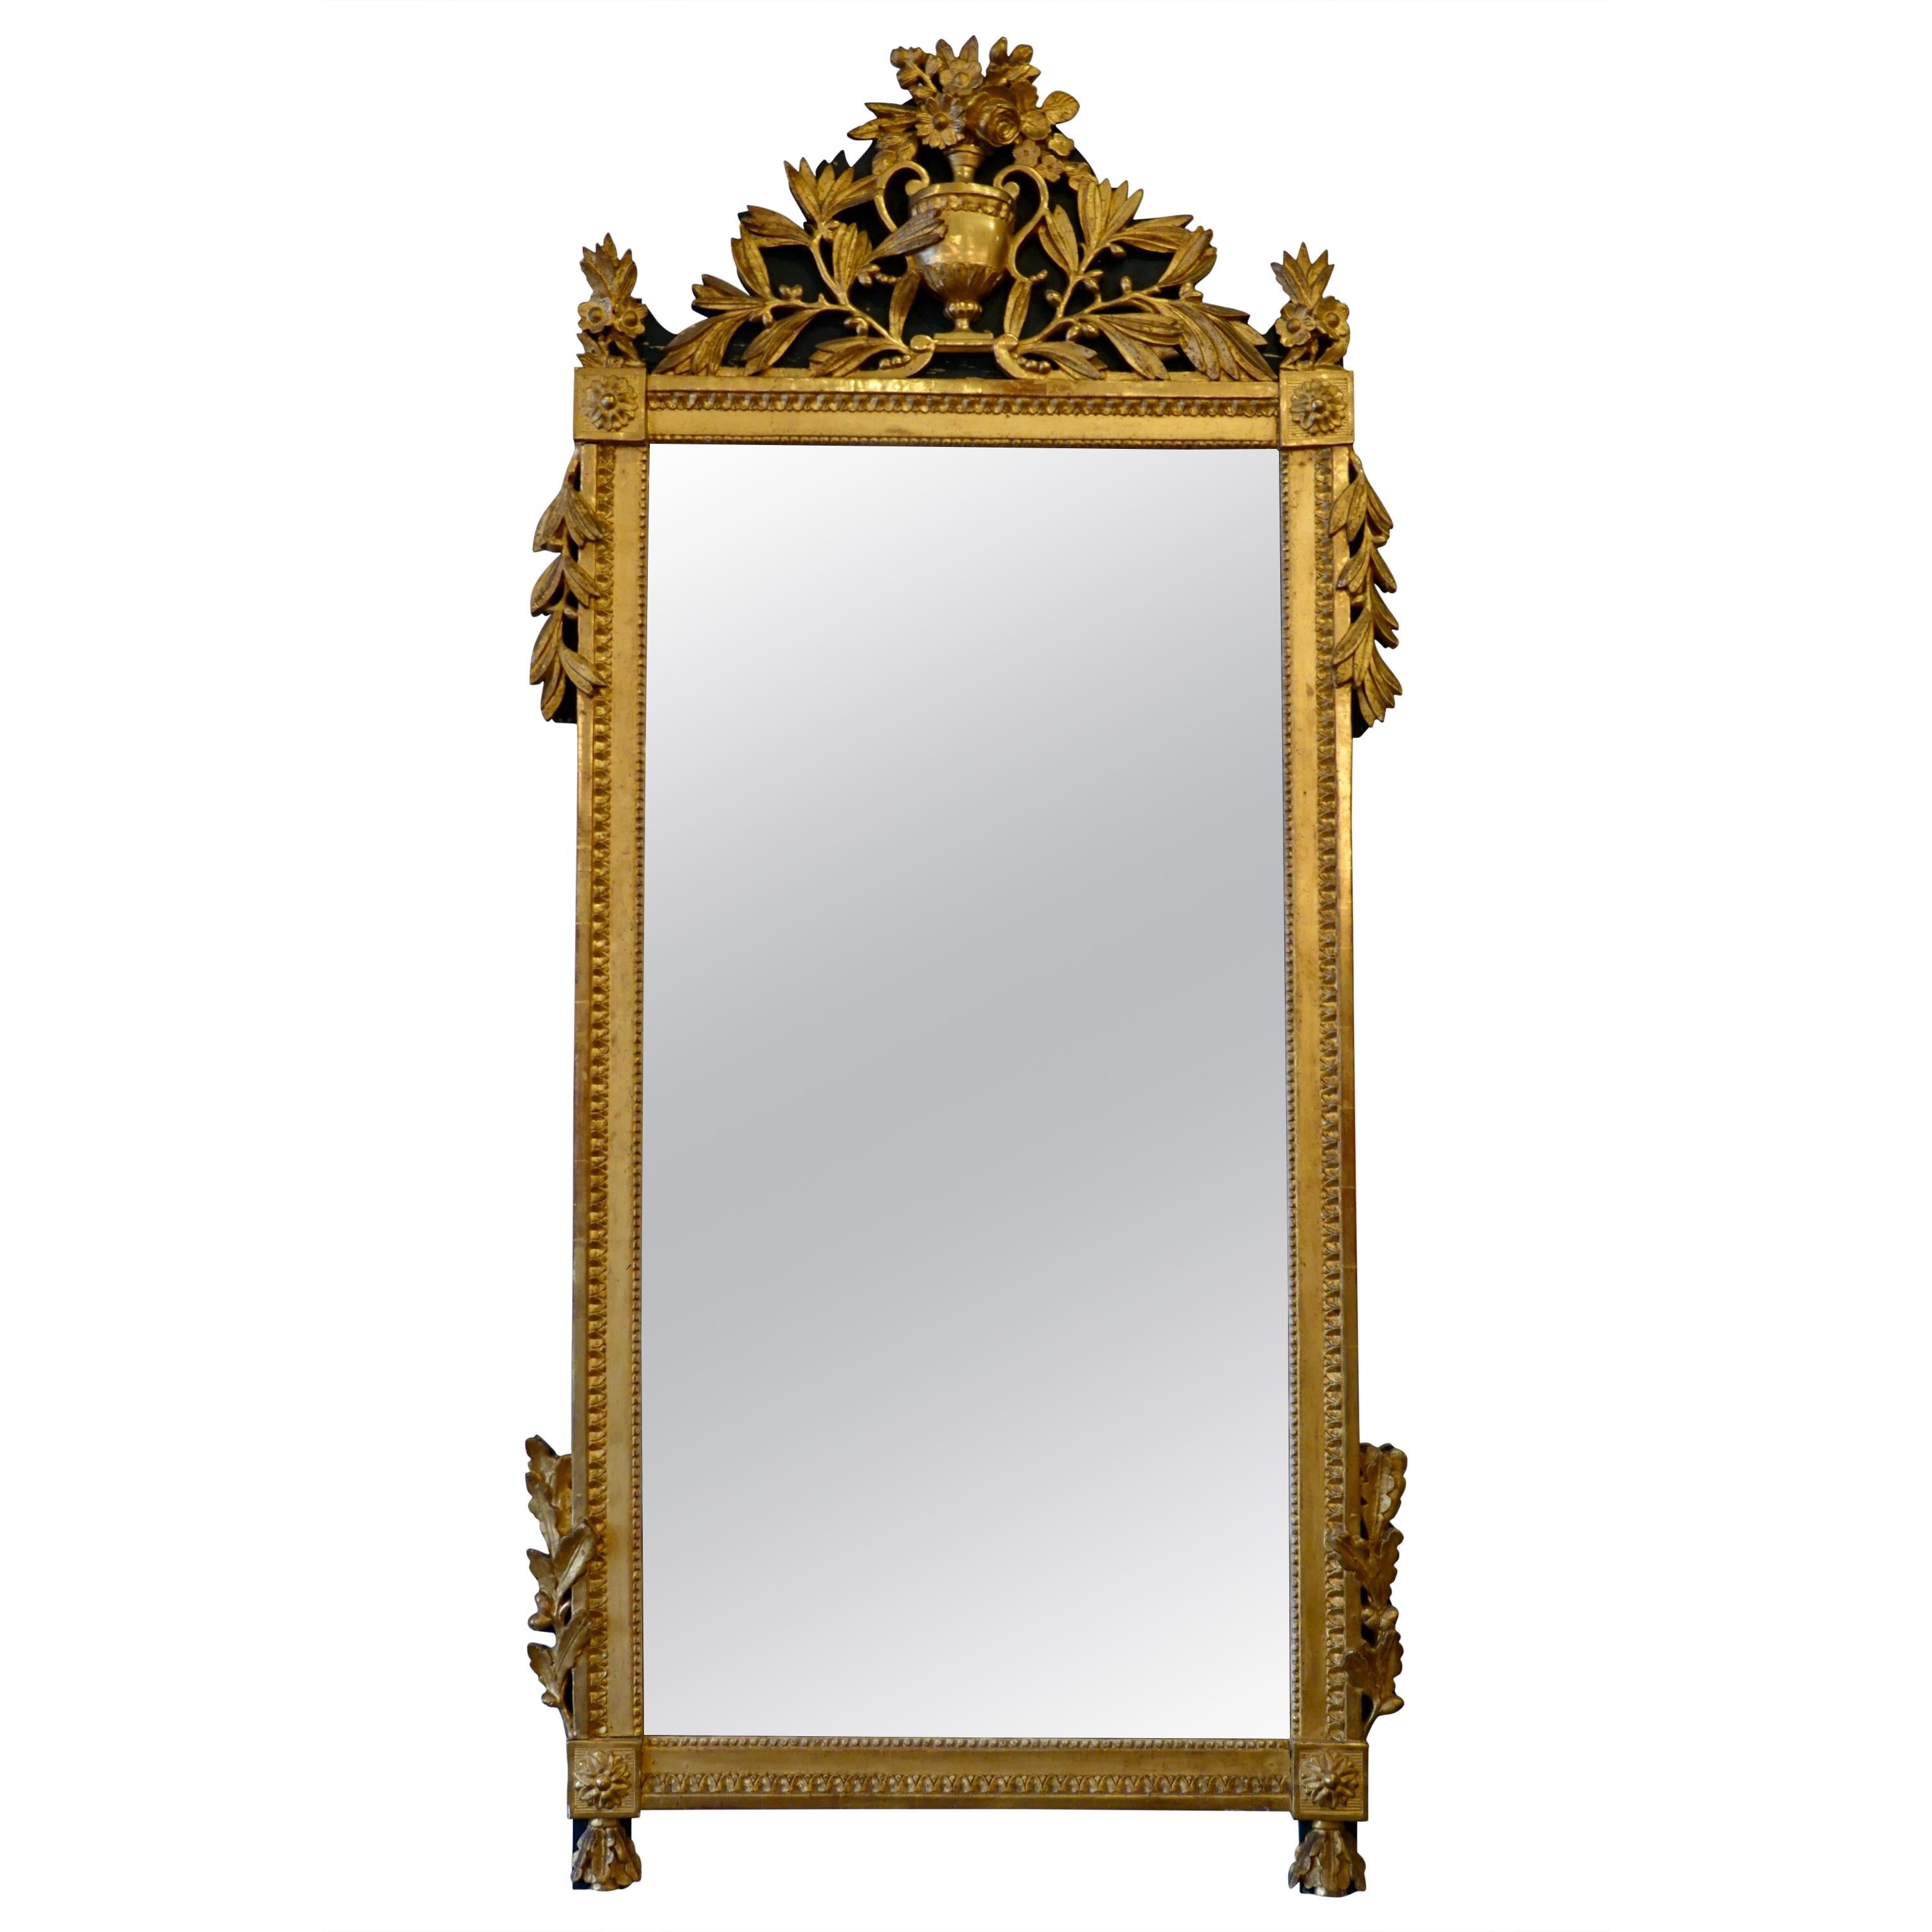 Louis XVI Period Giltwood Trumeau Mirror with Urn, Flowers and Laurel Leaves For Sale